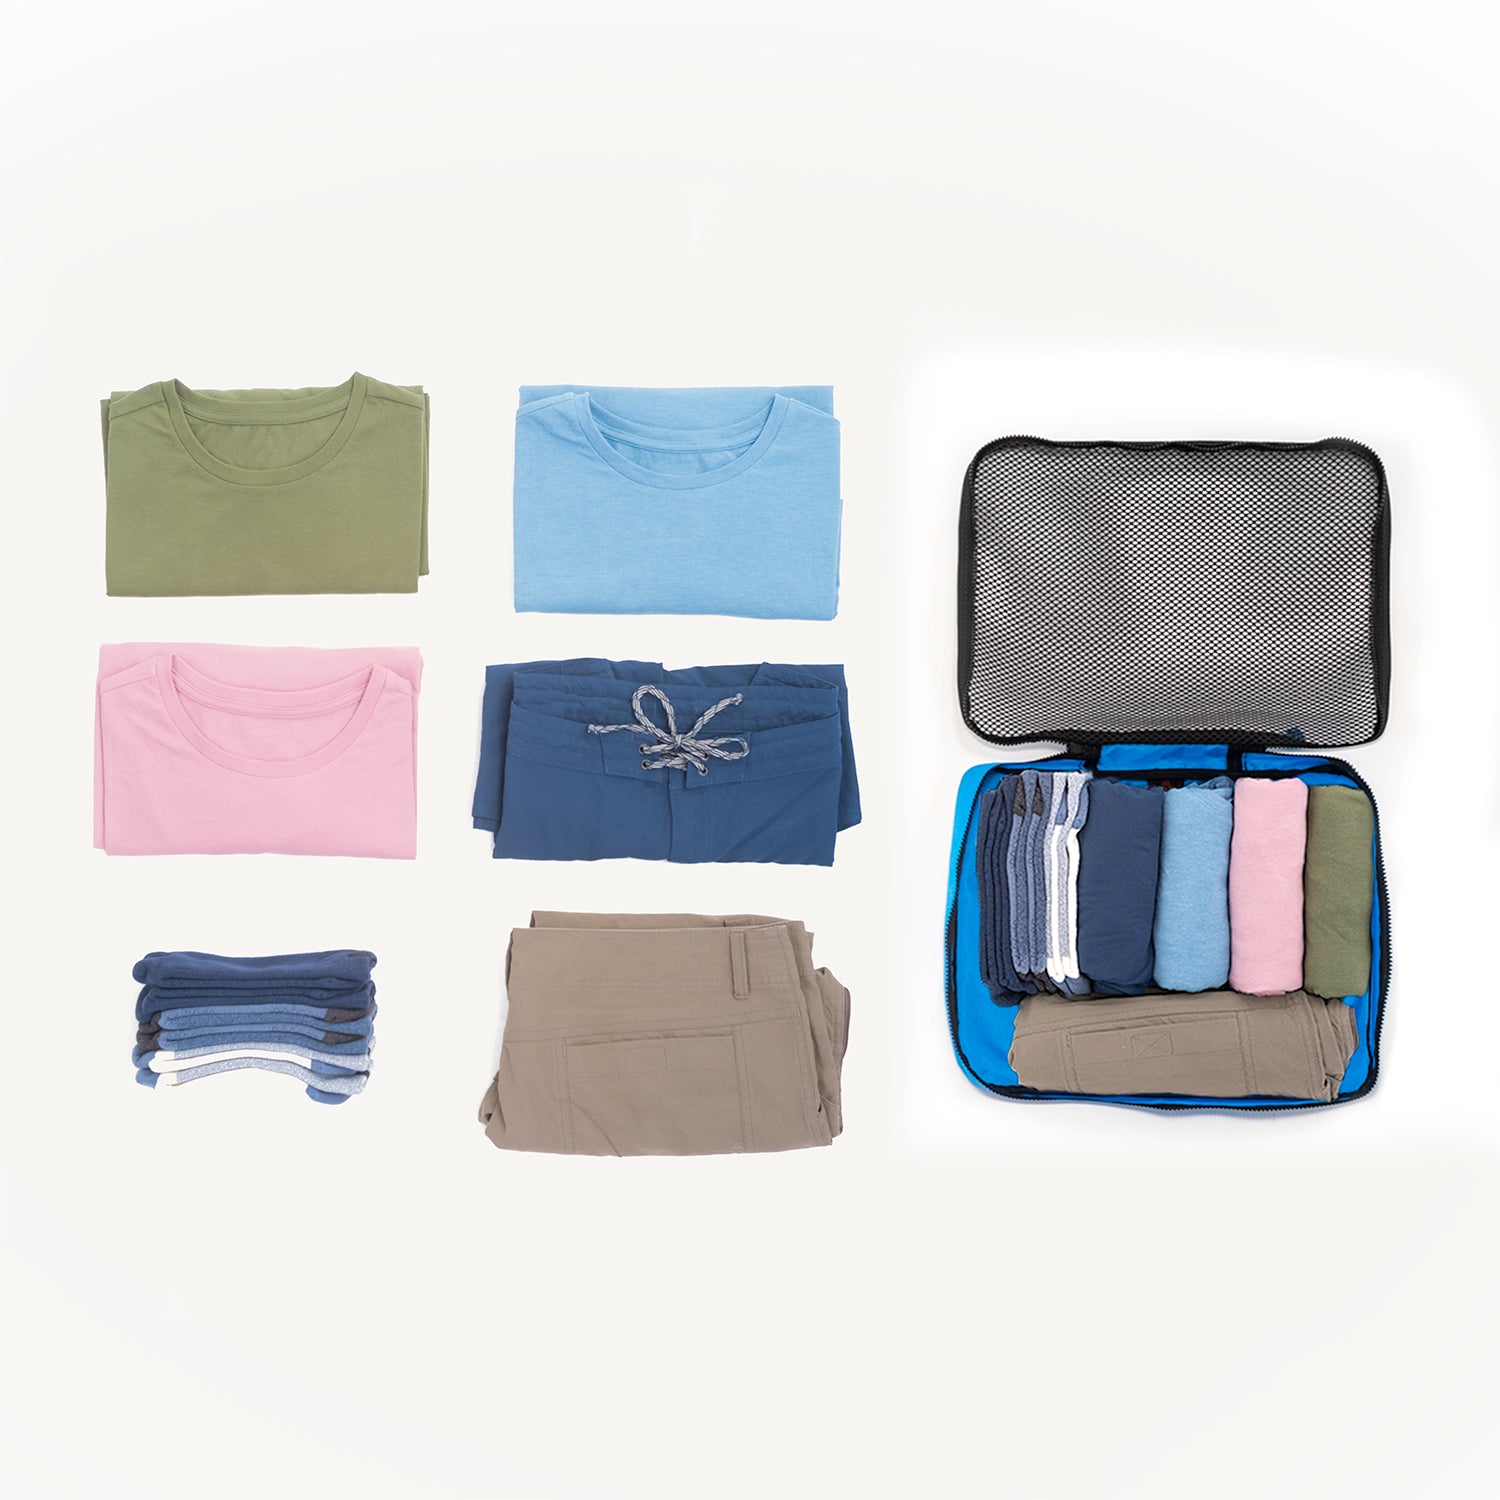 Kingfisher packing cube with sample clothes.  